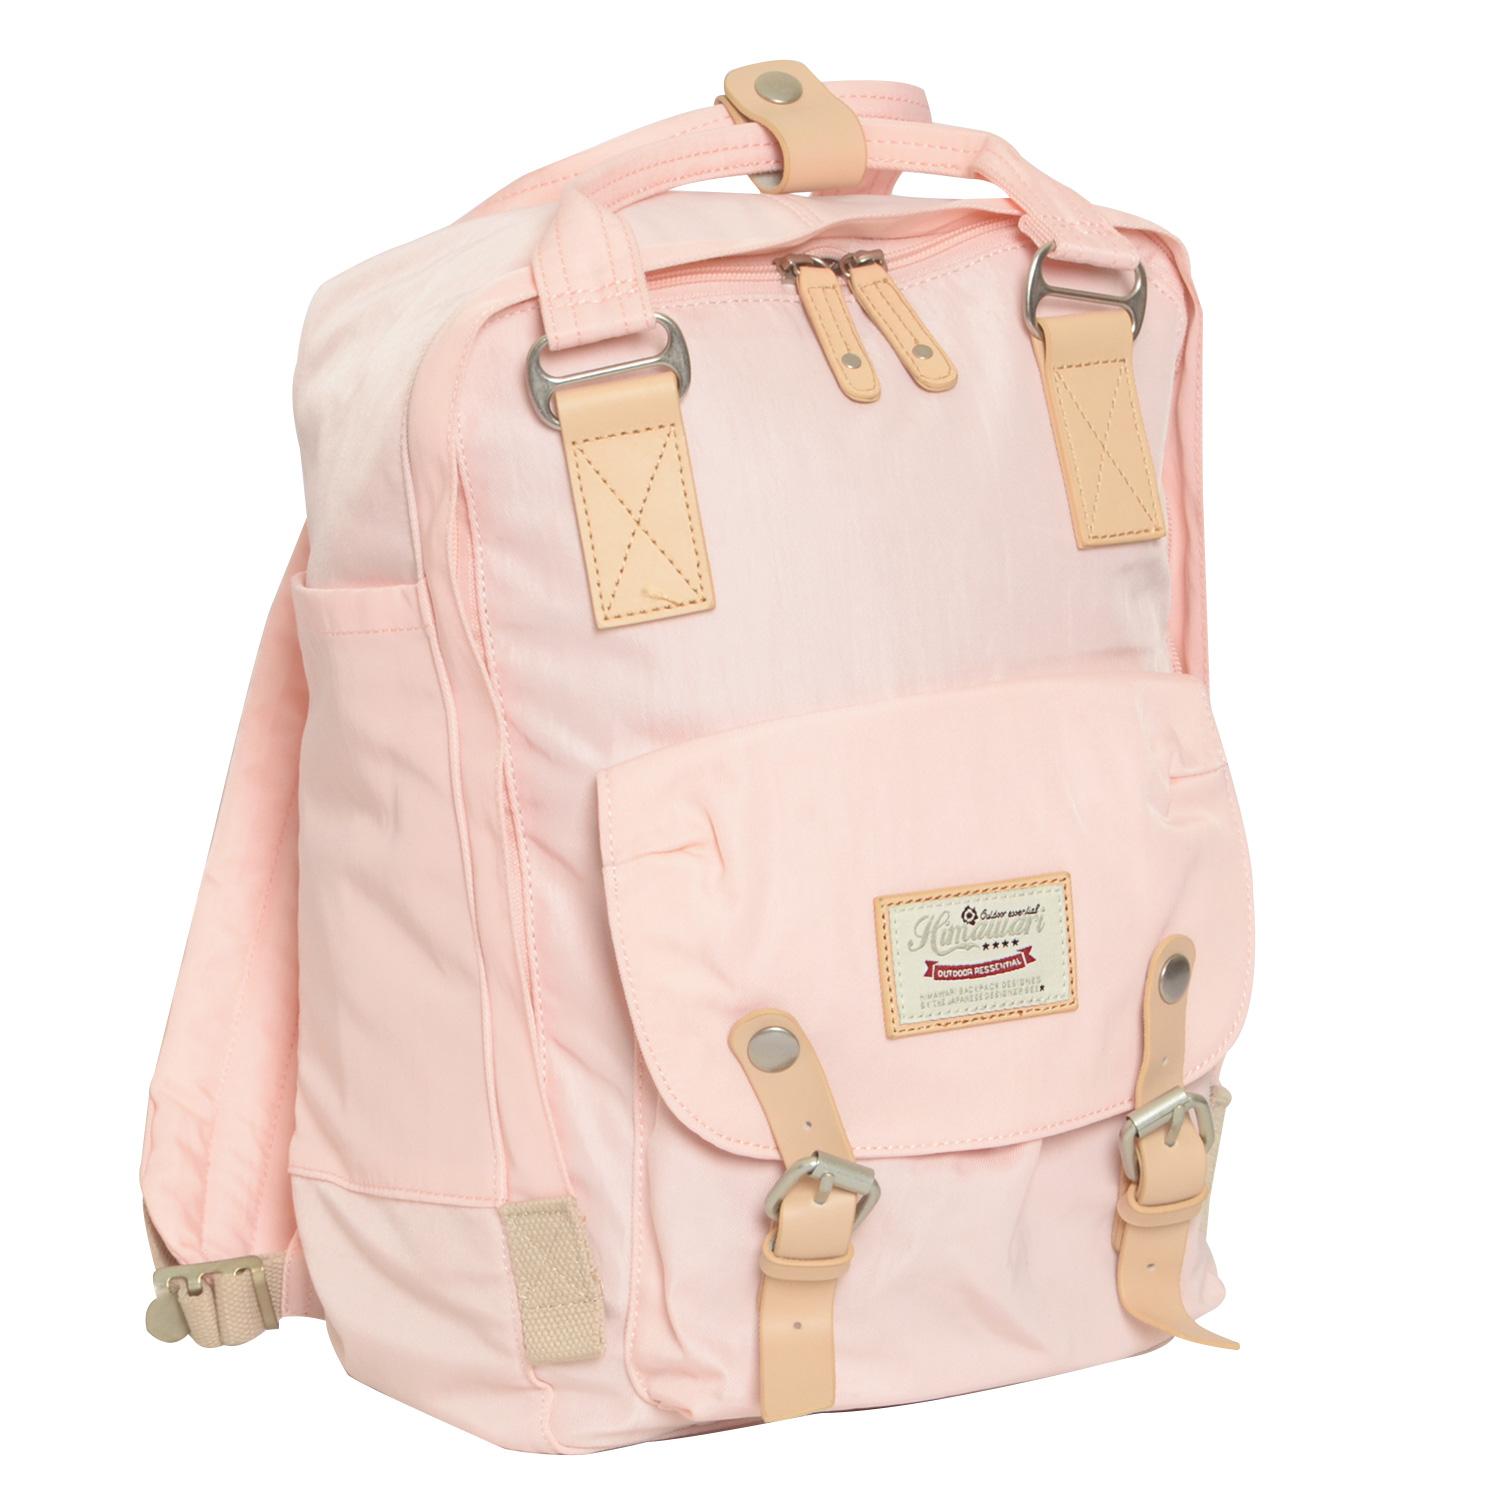 buttercup pastel pink